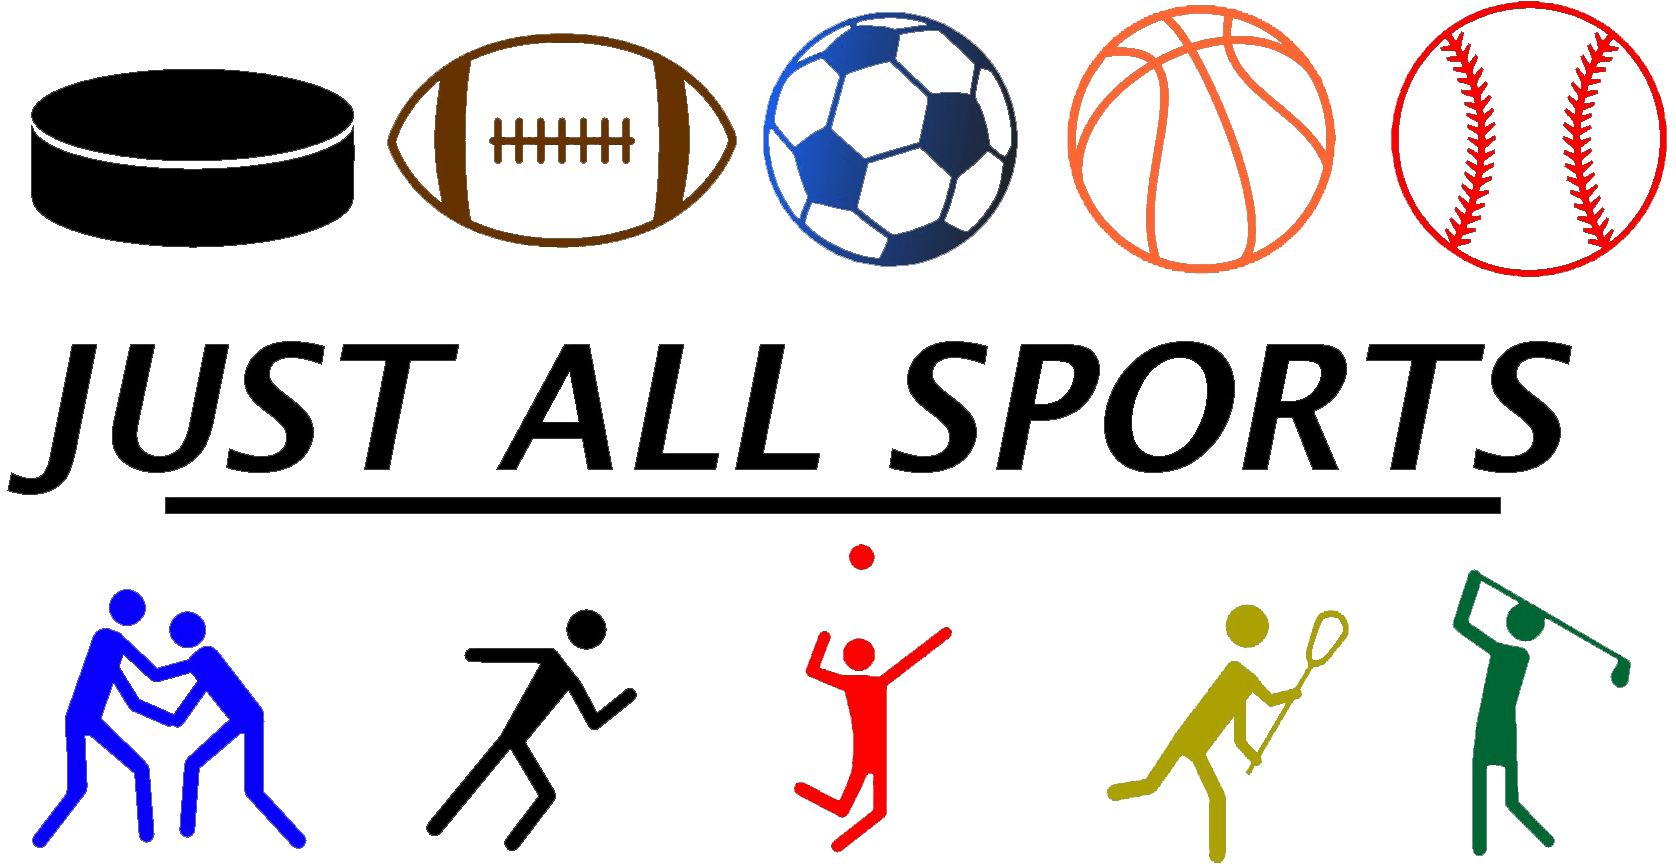 Just All Sports logo